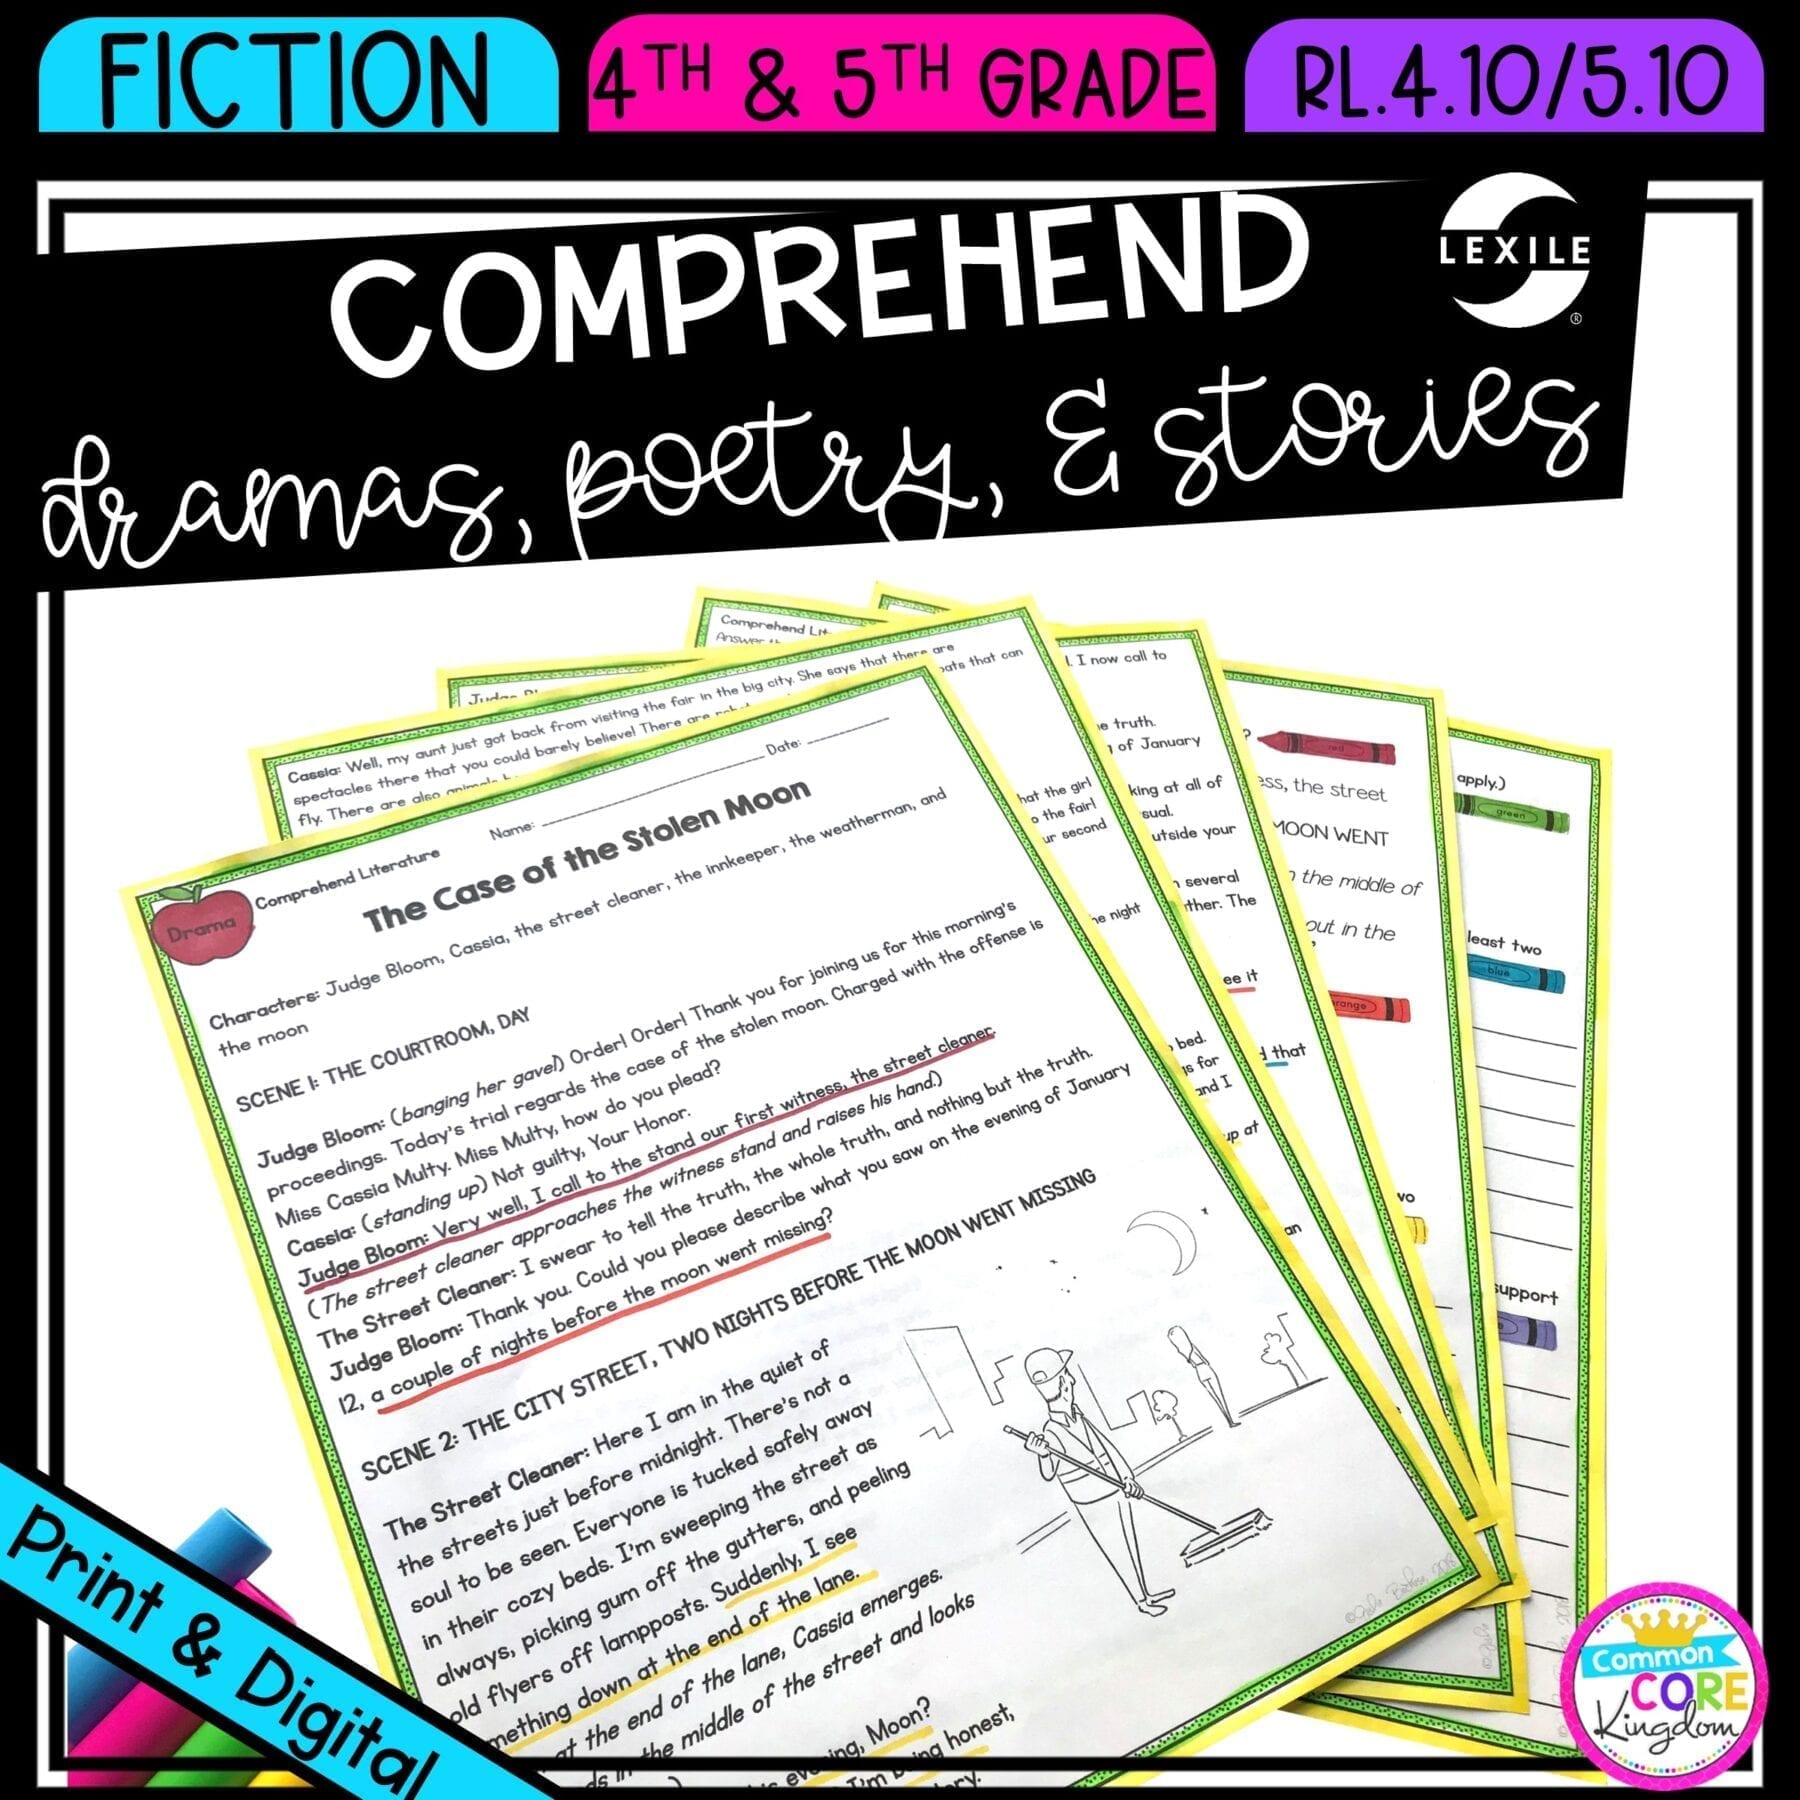 Reading Comprehension in Literature for 4th & 5th grade cover showing printable and digital worksheets